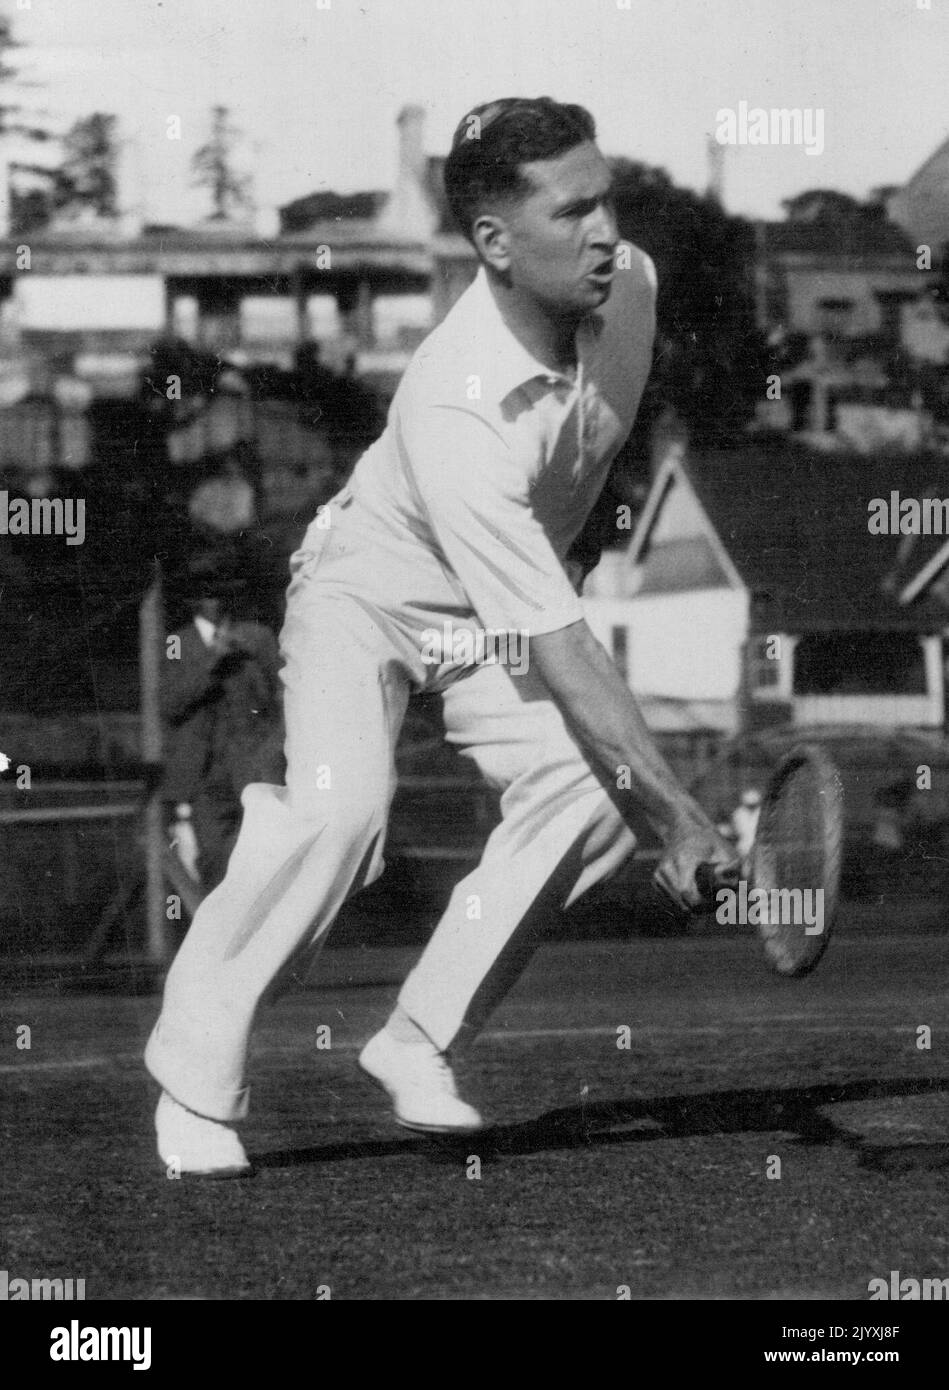 C. Sproule, who played Hilton for the final of the mens ***** champ at Comm. Bank tennis. February 20, 1934. Stock Photo